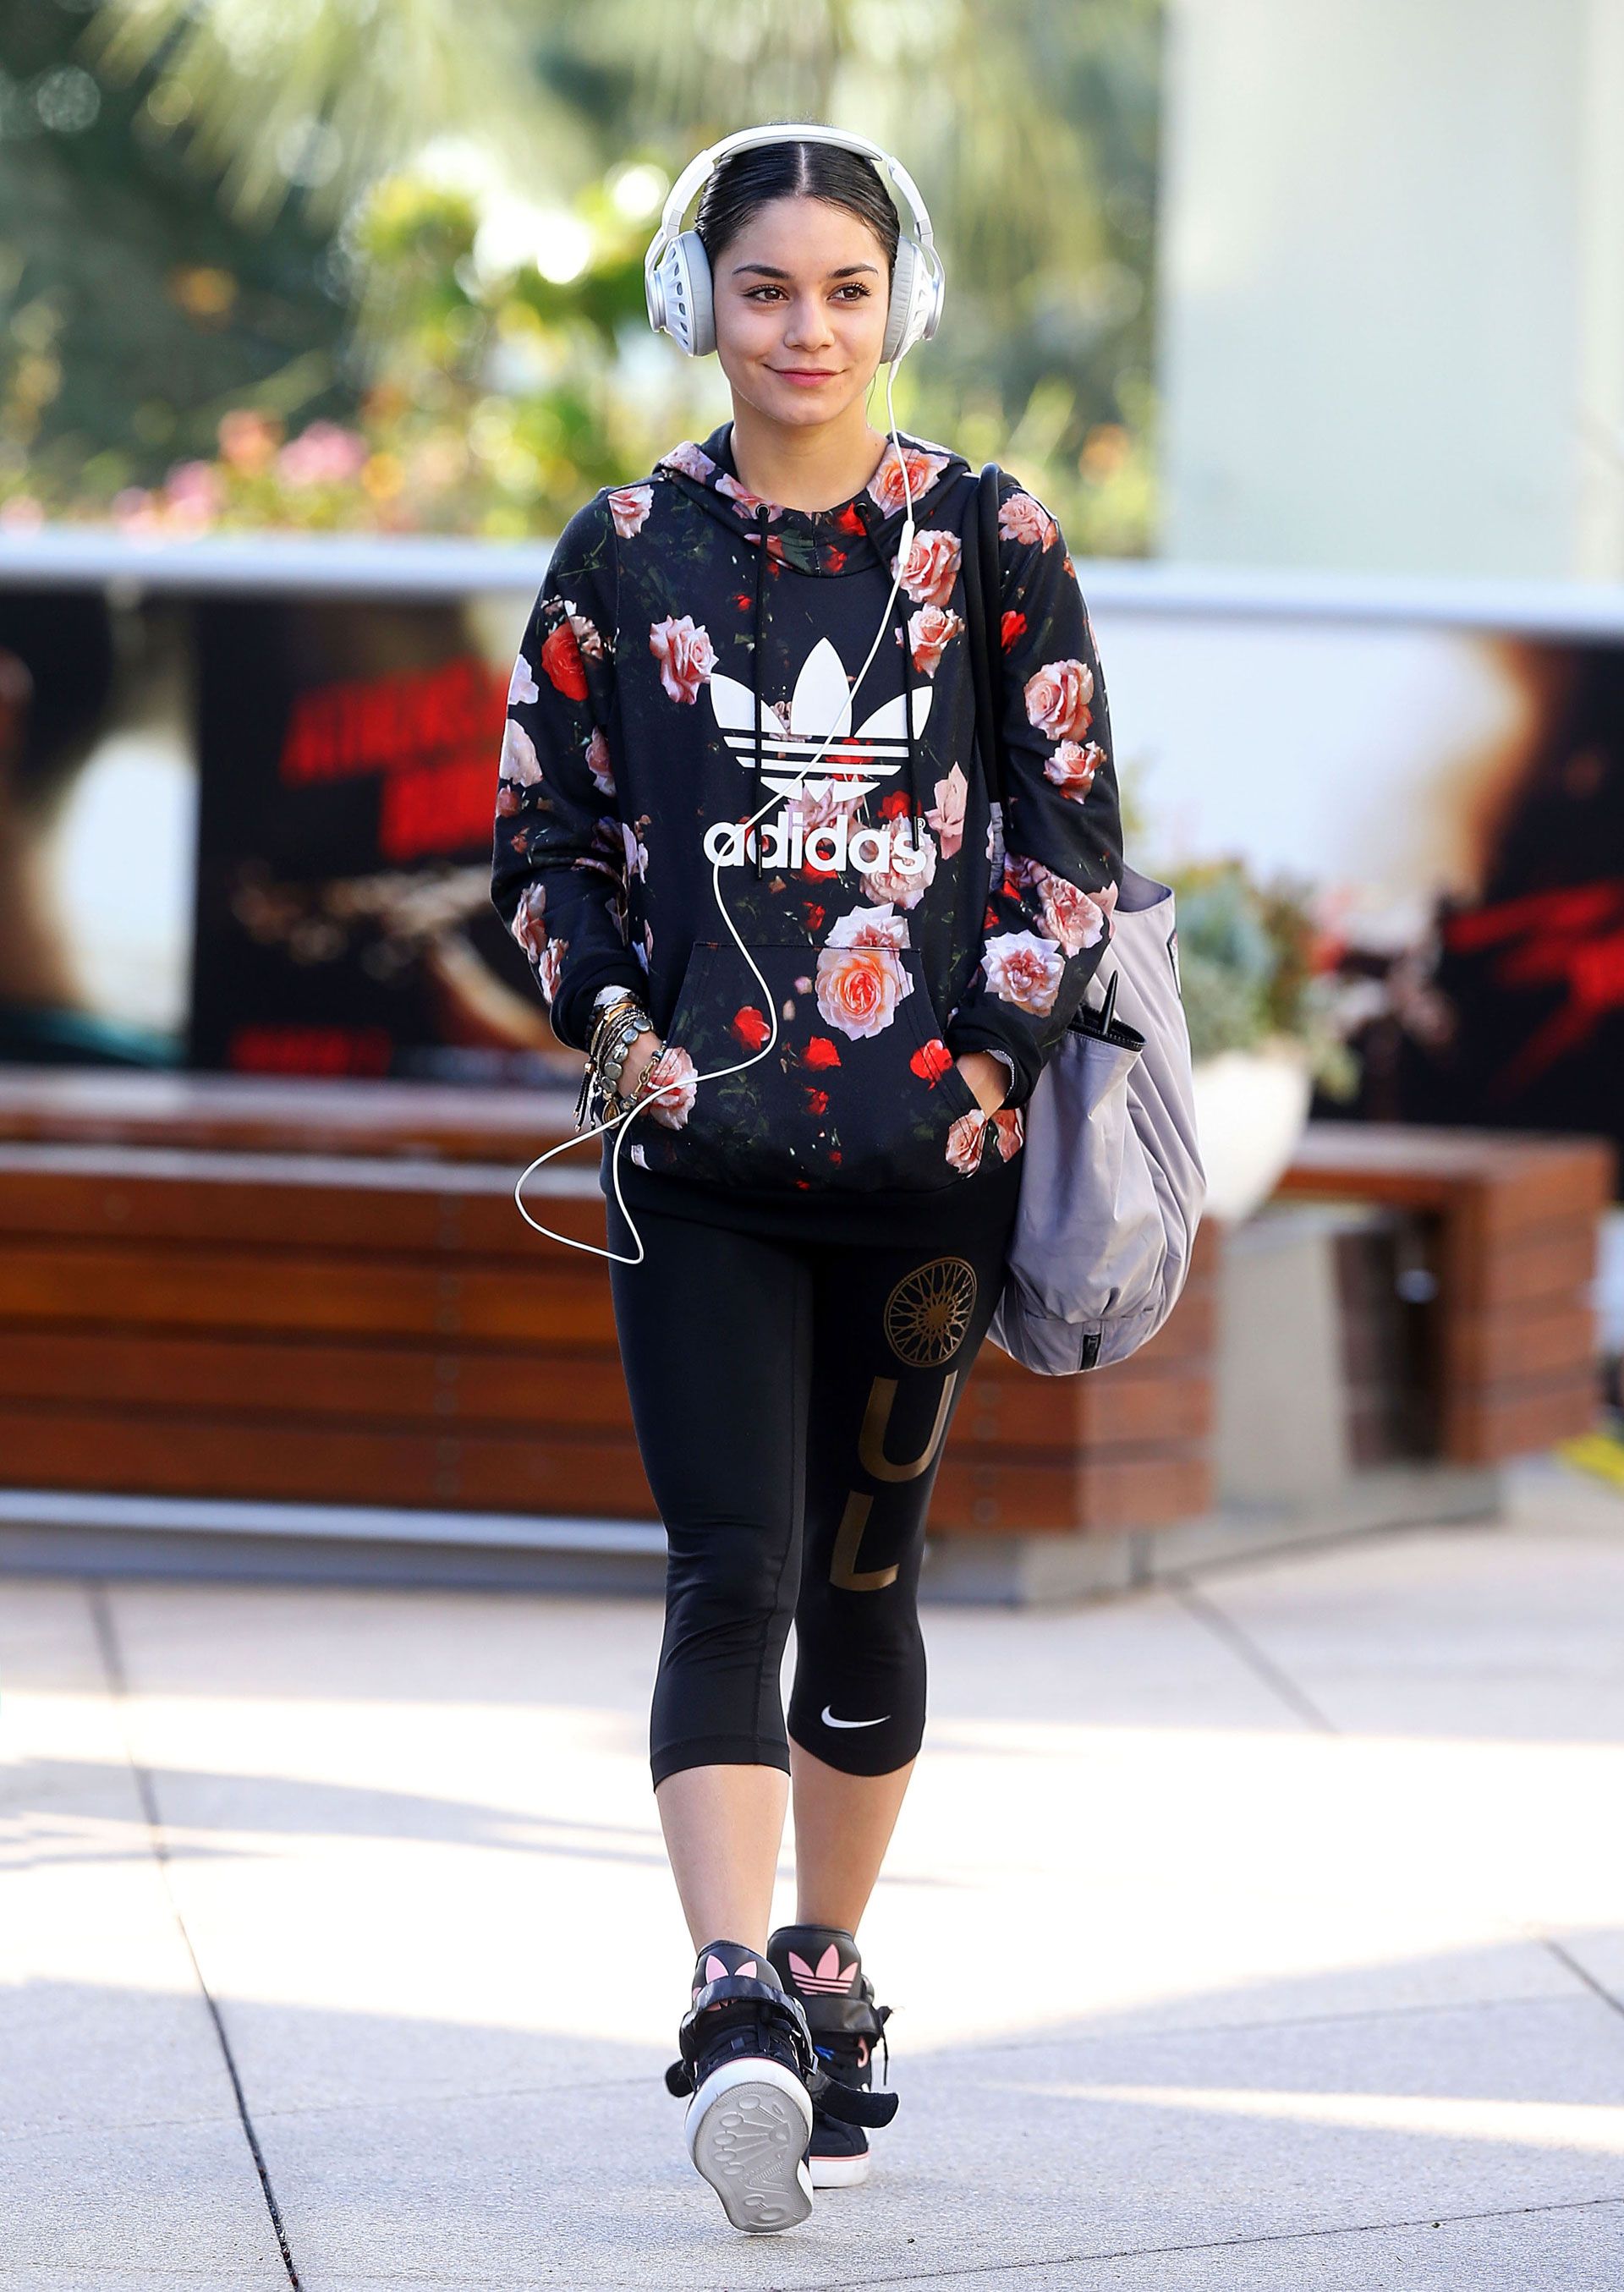 Celebrity Workout Clothes - What to Wear While Working Out